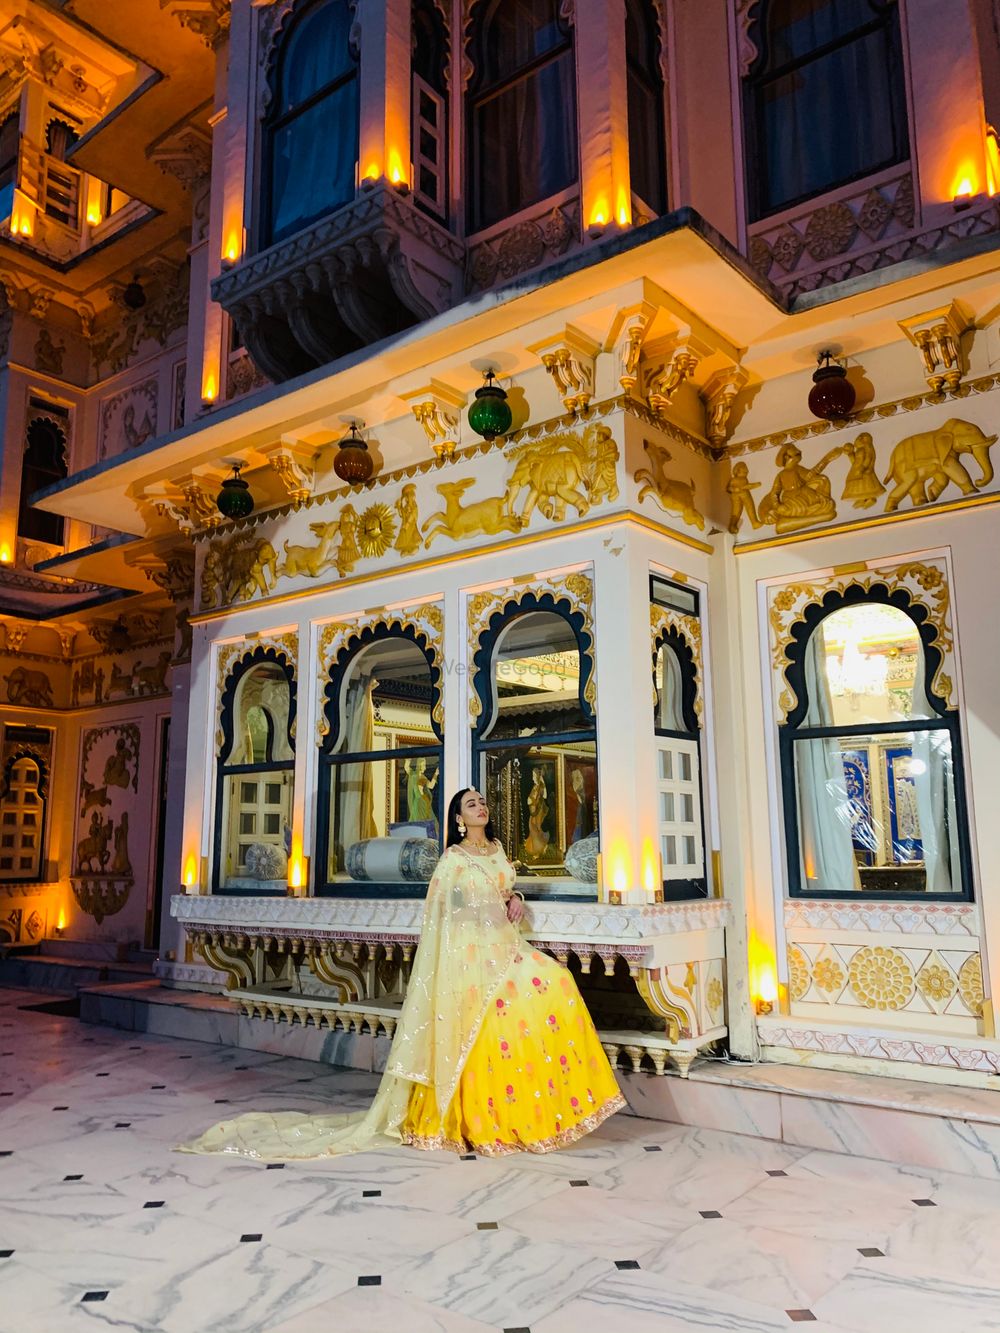 Photo By The Ethnic Jaipur - Bridal Wear